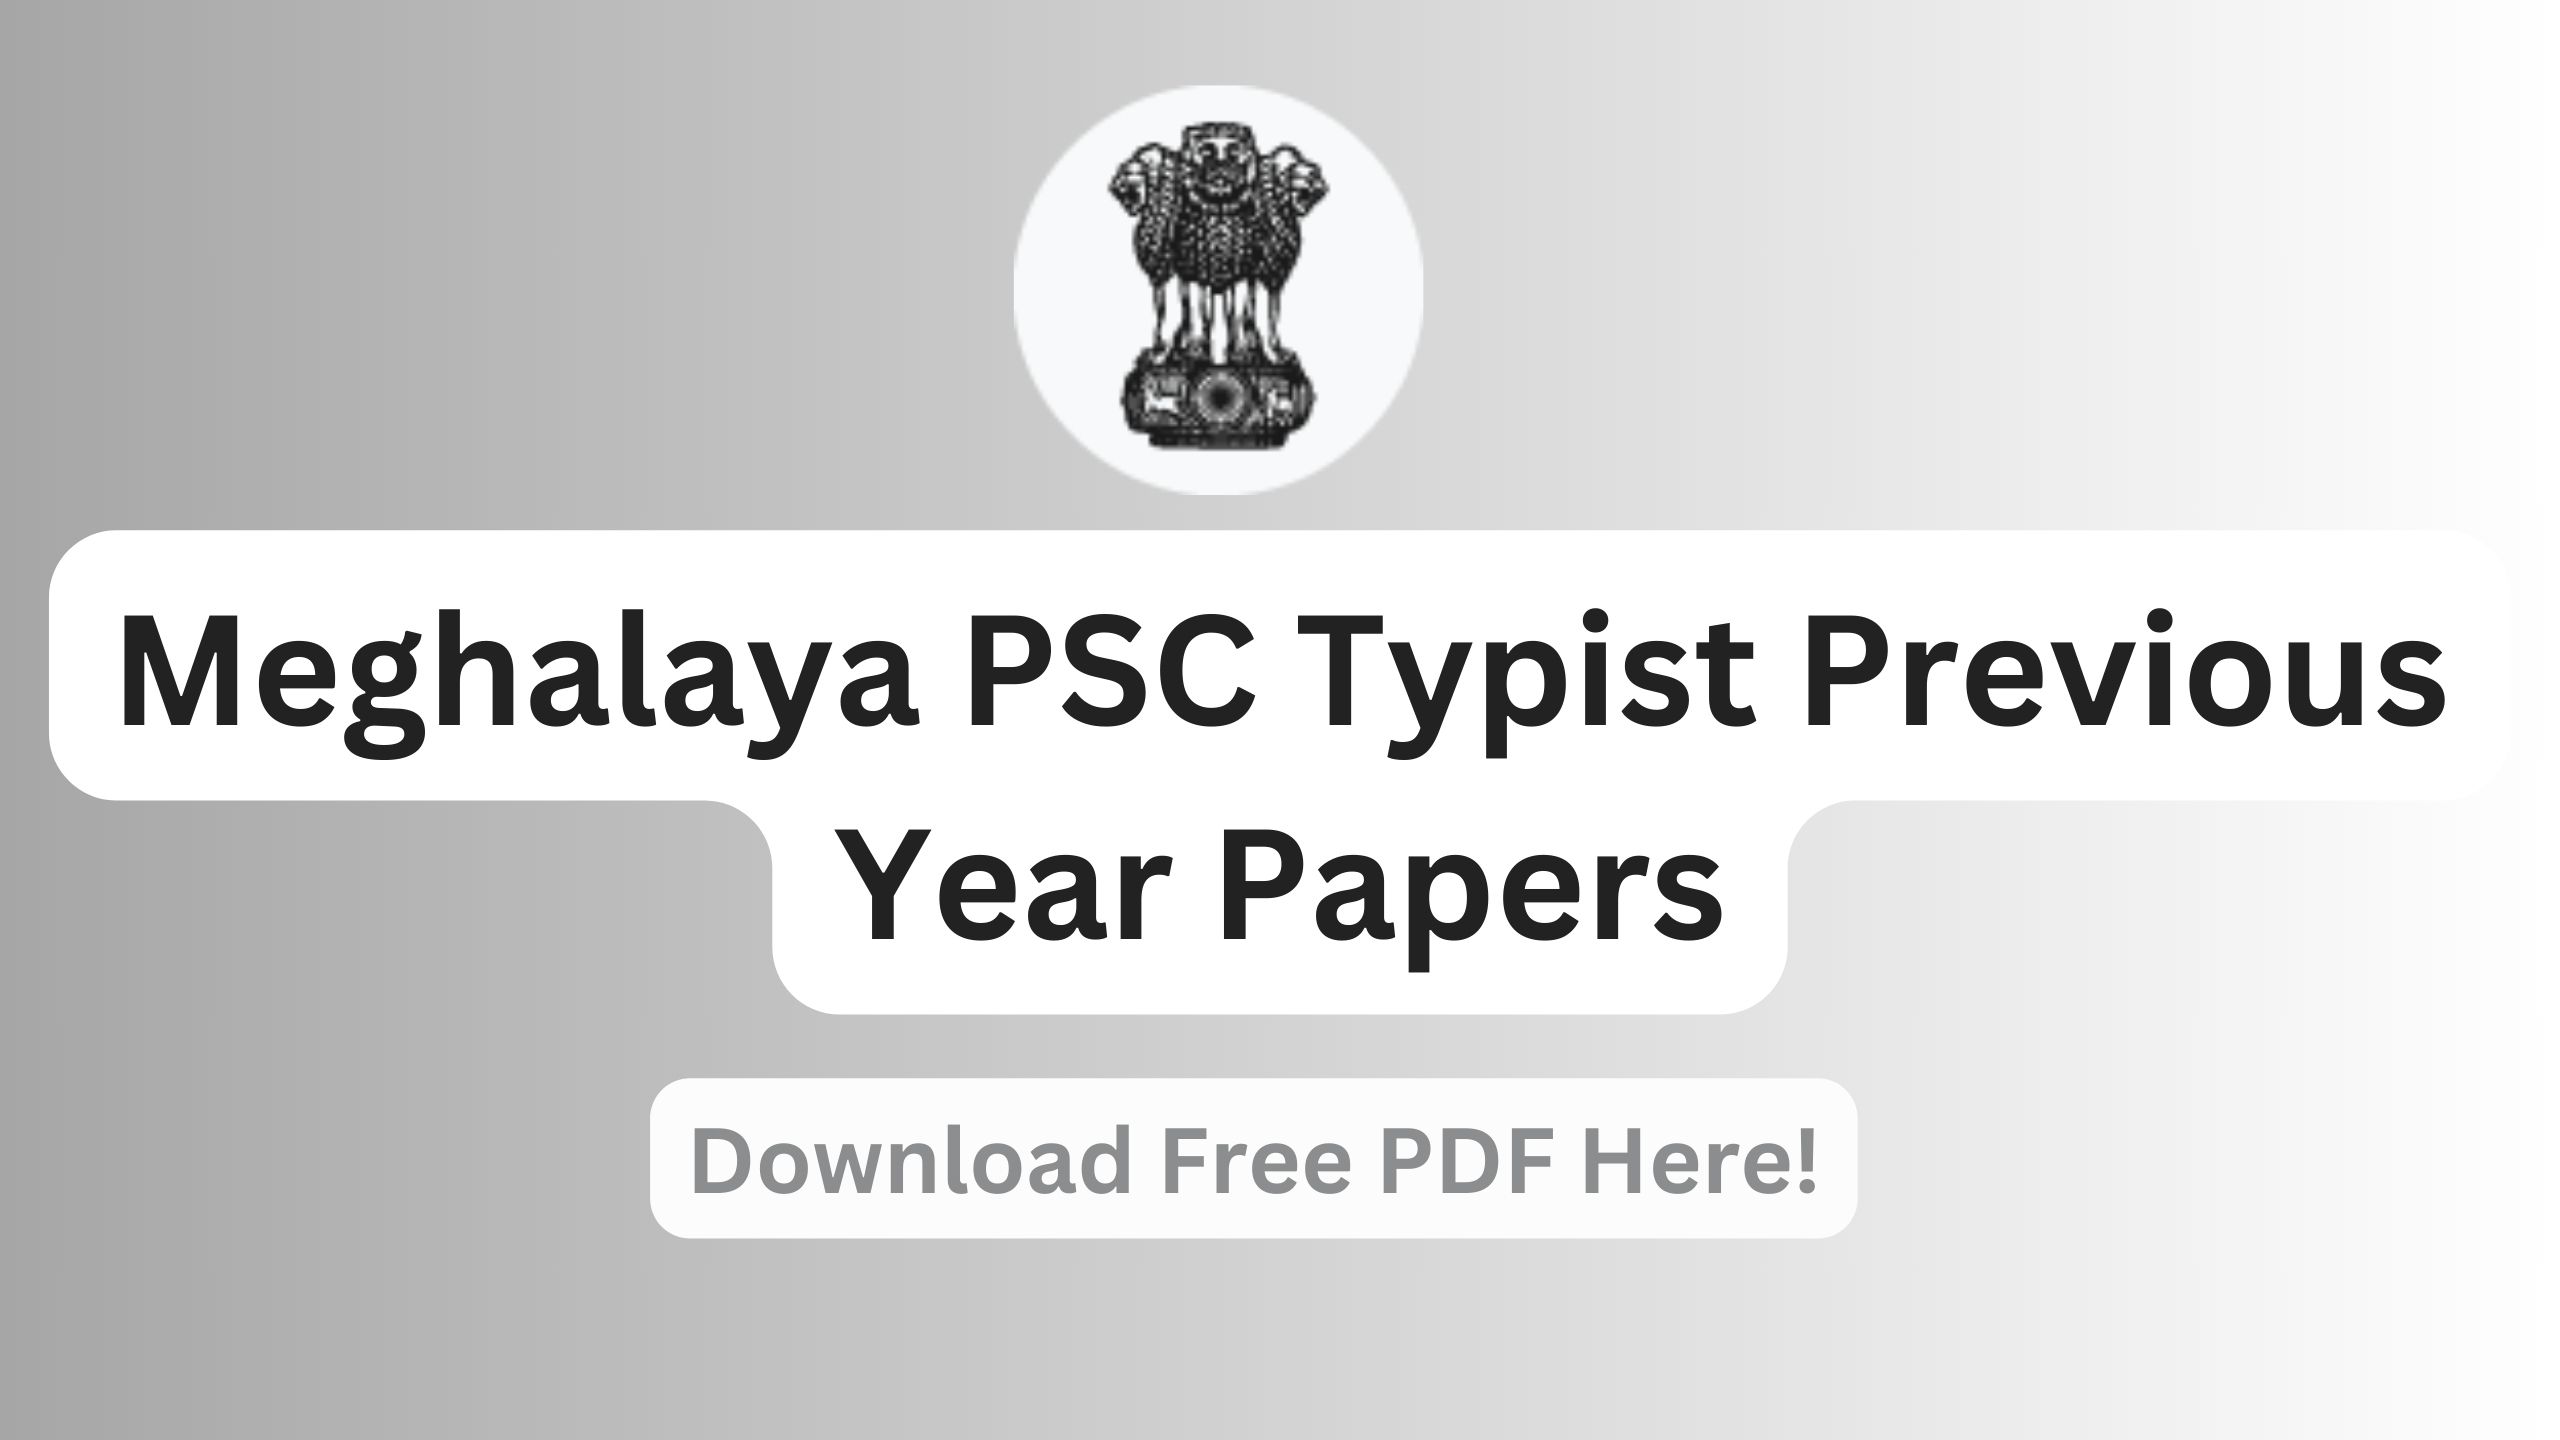 Meghalaya PSC Typist Previous Year Papers